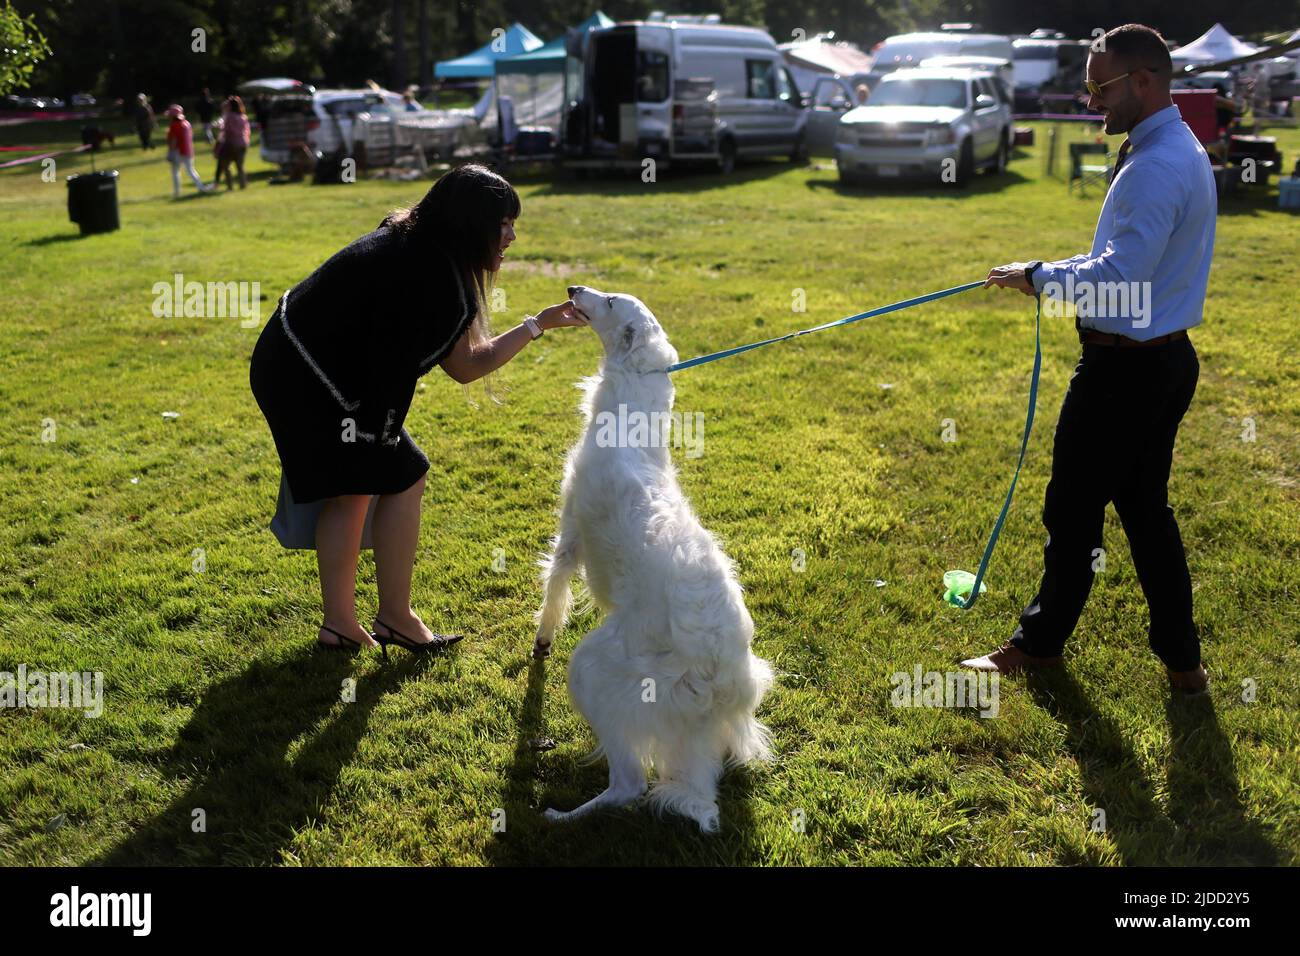 A woman greets Glace, a Borzoi dog, in the benching area ahead of the breed judging during the 146th Westminster Kennel Club Dog Show at the Lyndhurst Estate in Tarrytown, New York, U.S., June 20, 2022. REUTERS/Mike Segar Stock Photo